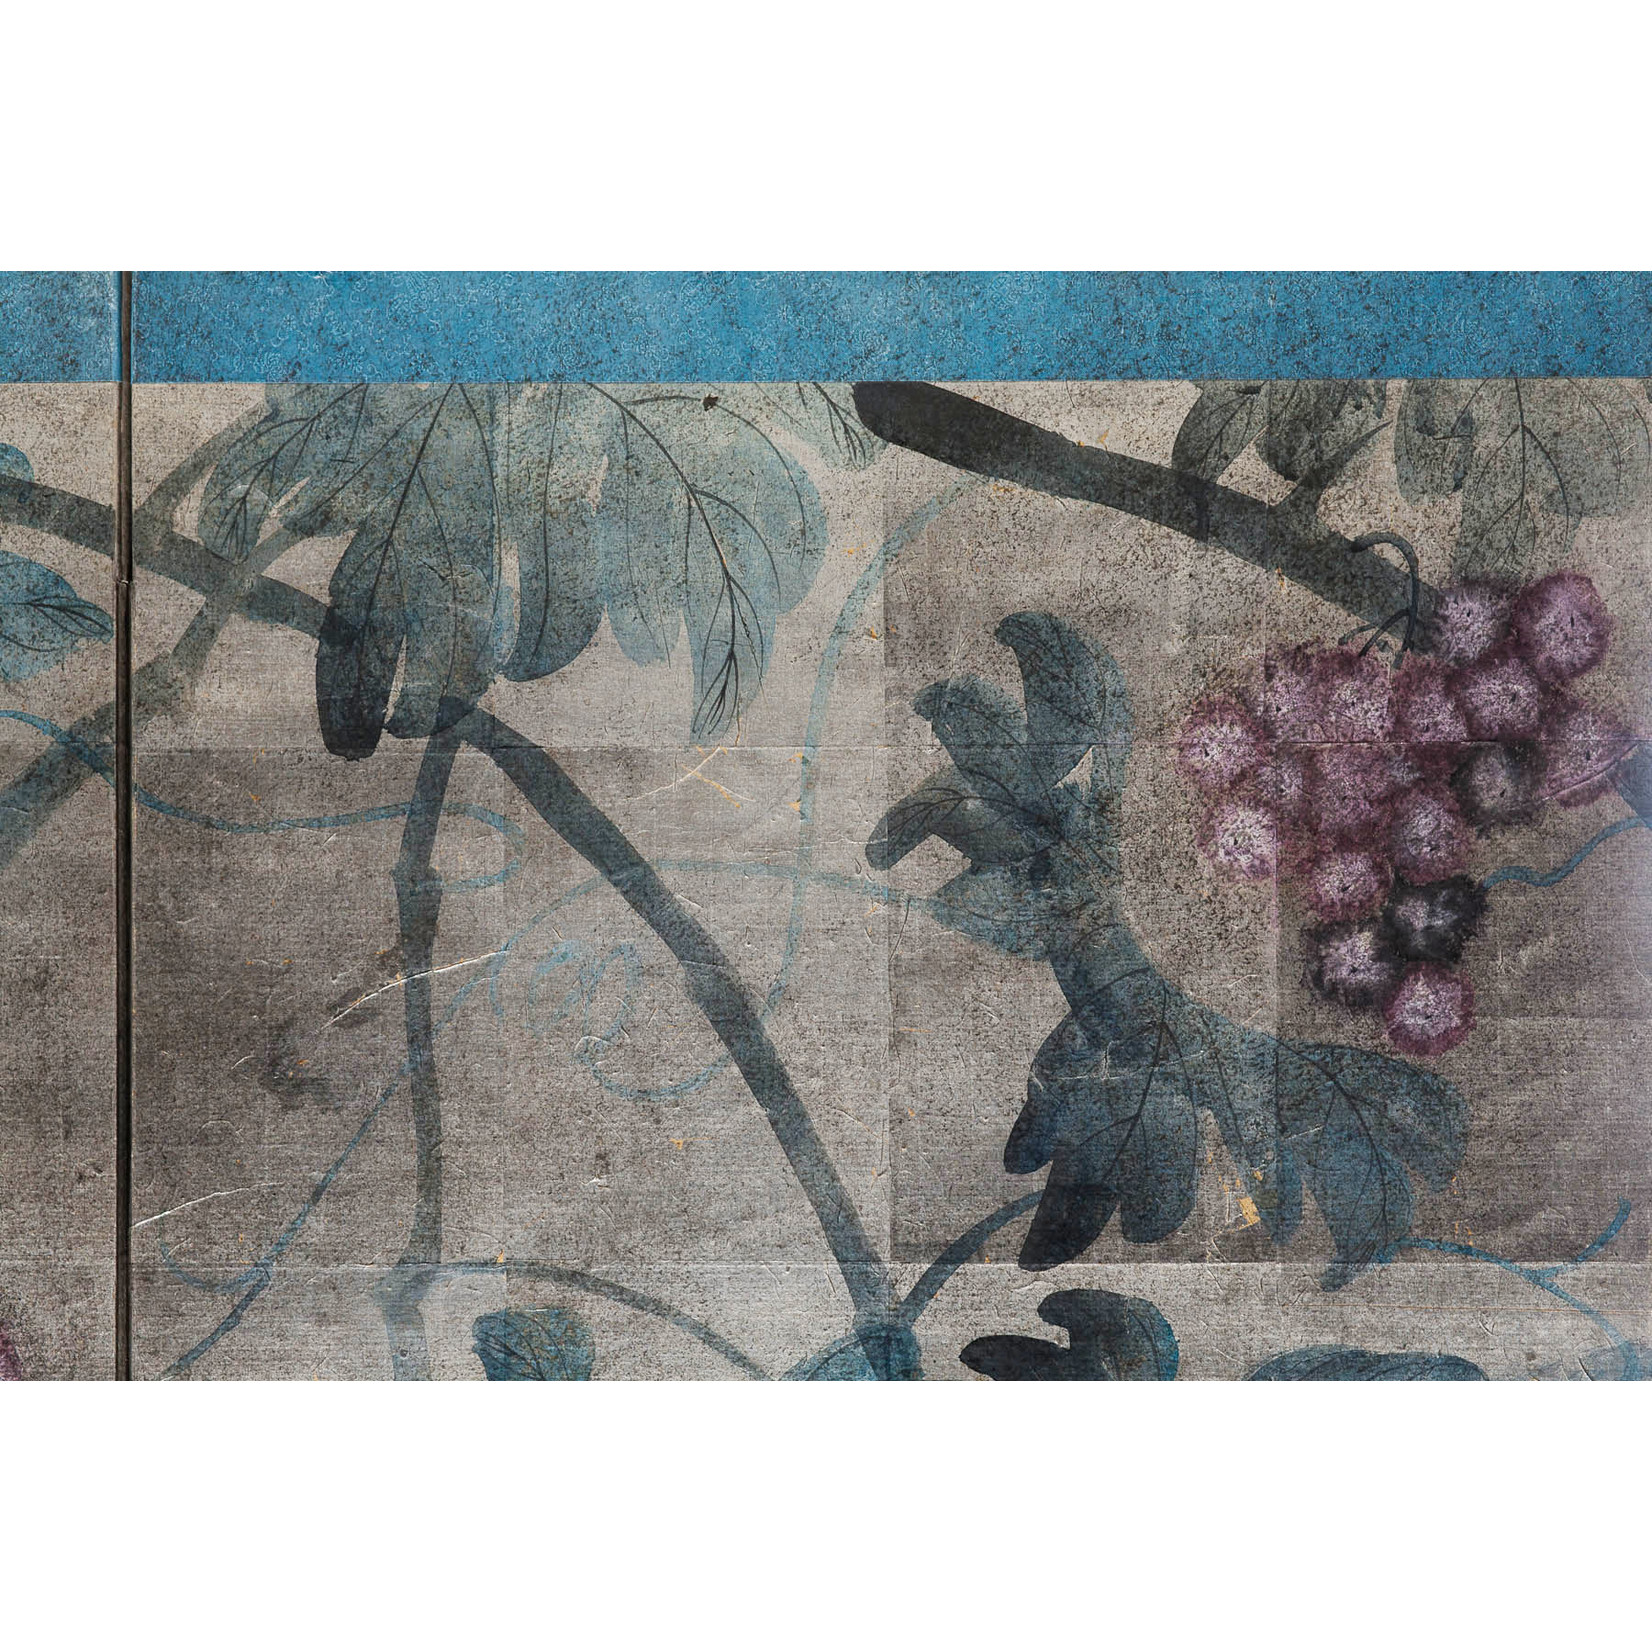 Lawrence & Scott Sung Tze-Chin "Tranquility" 4-Panel Ink on Paper Grapevine Chinoiserie Hanging Screen Painting